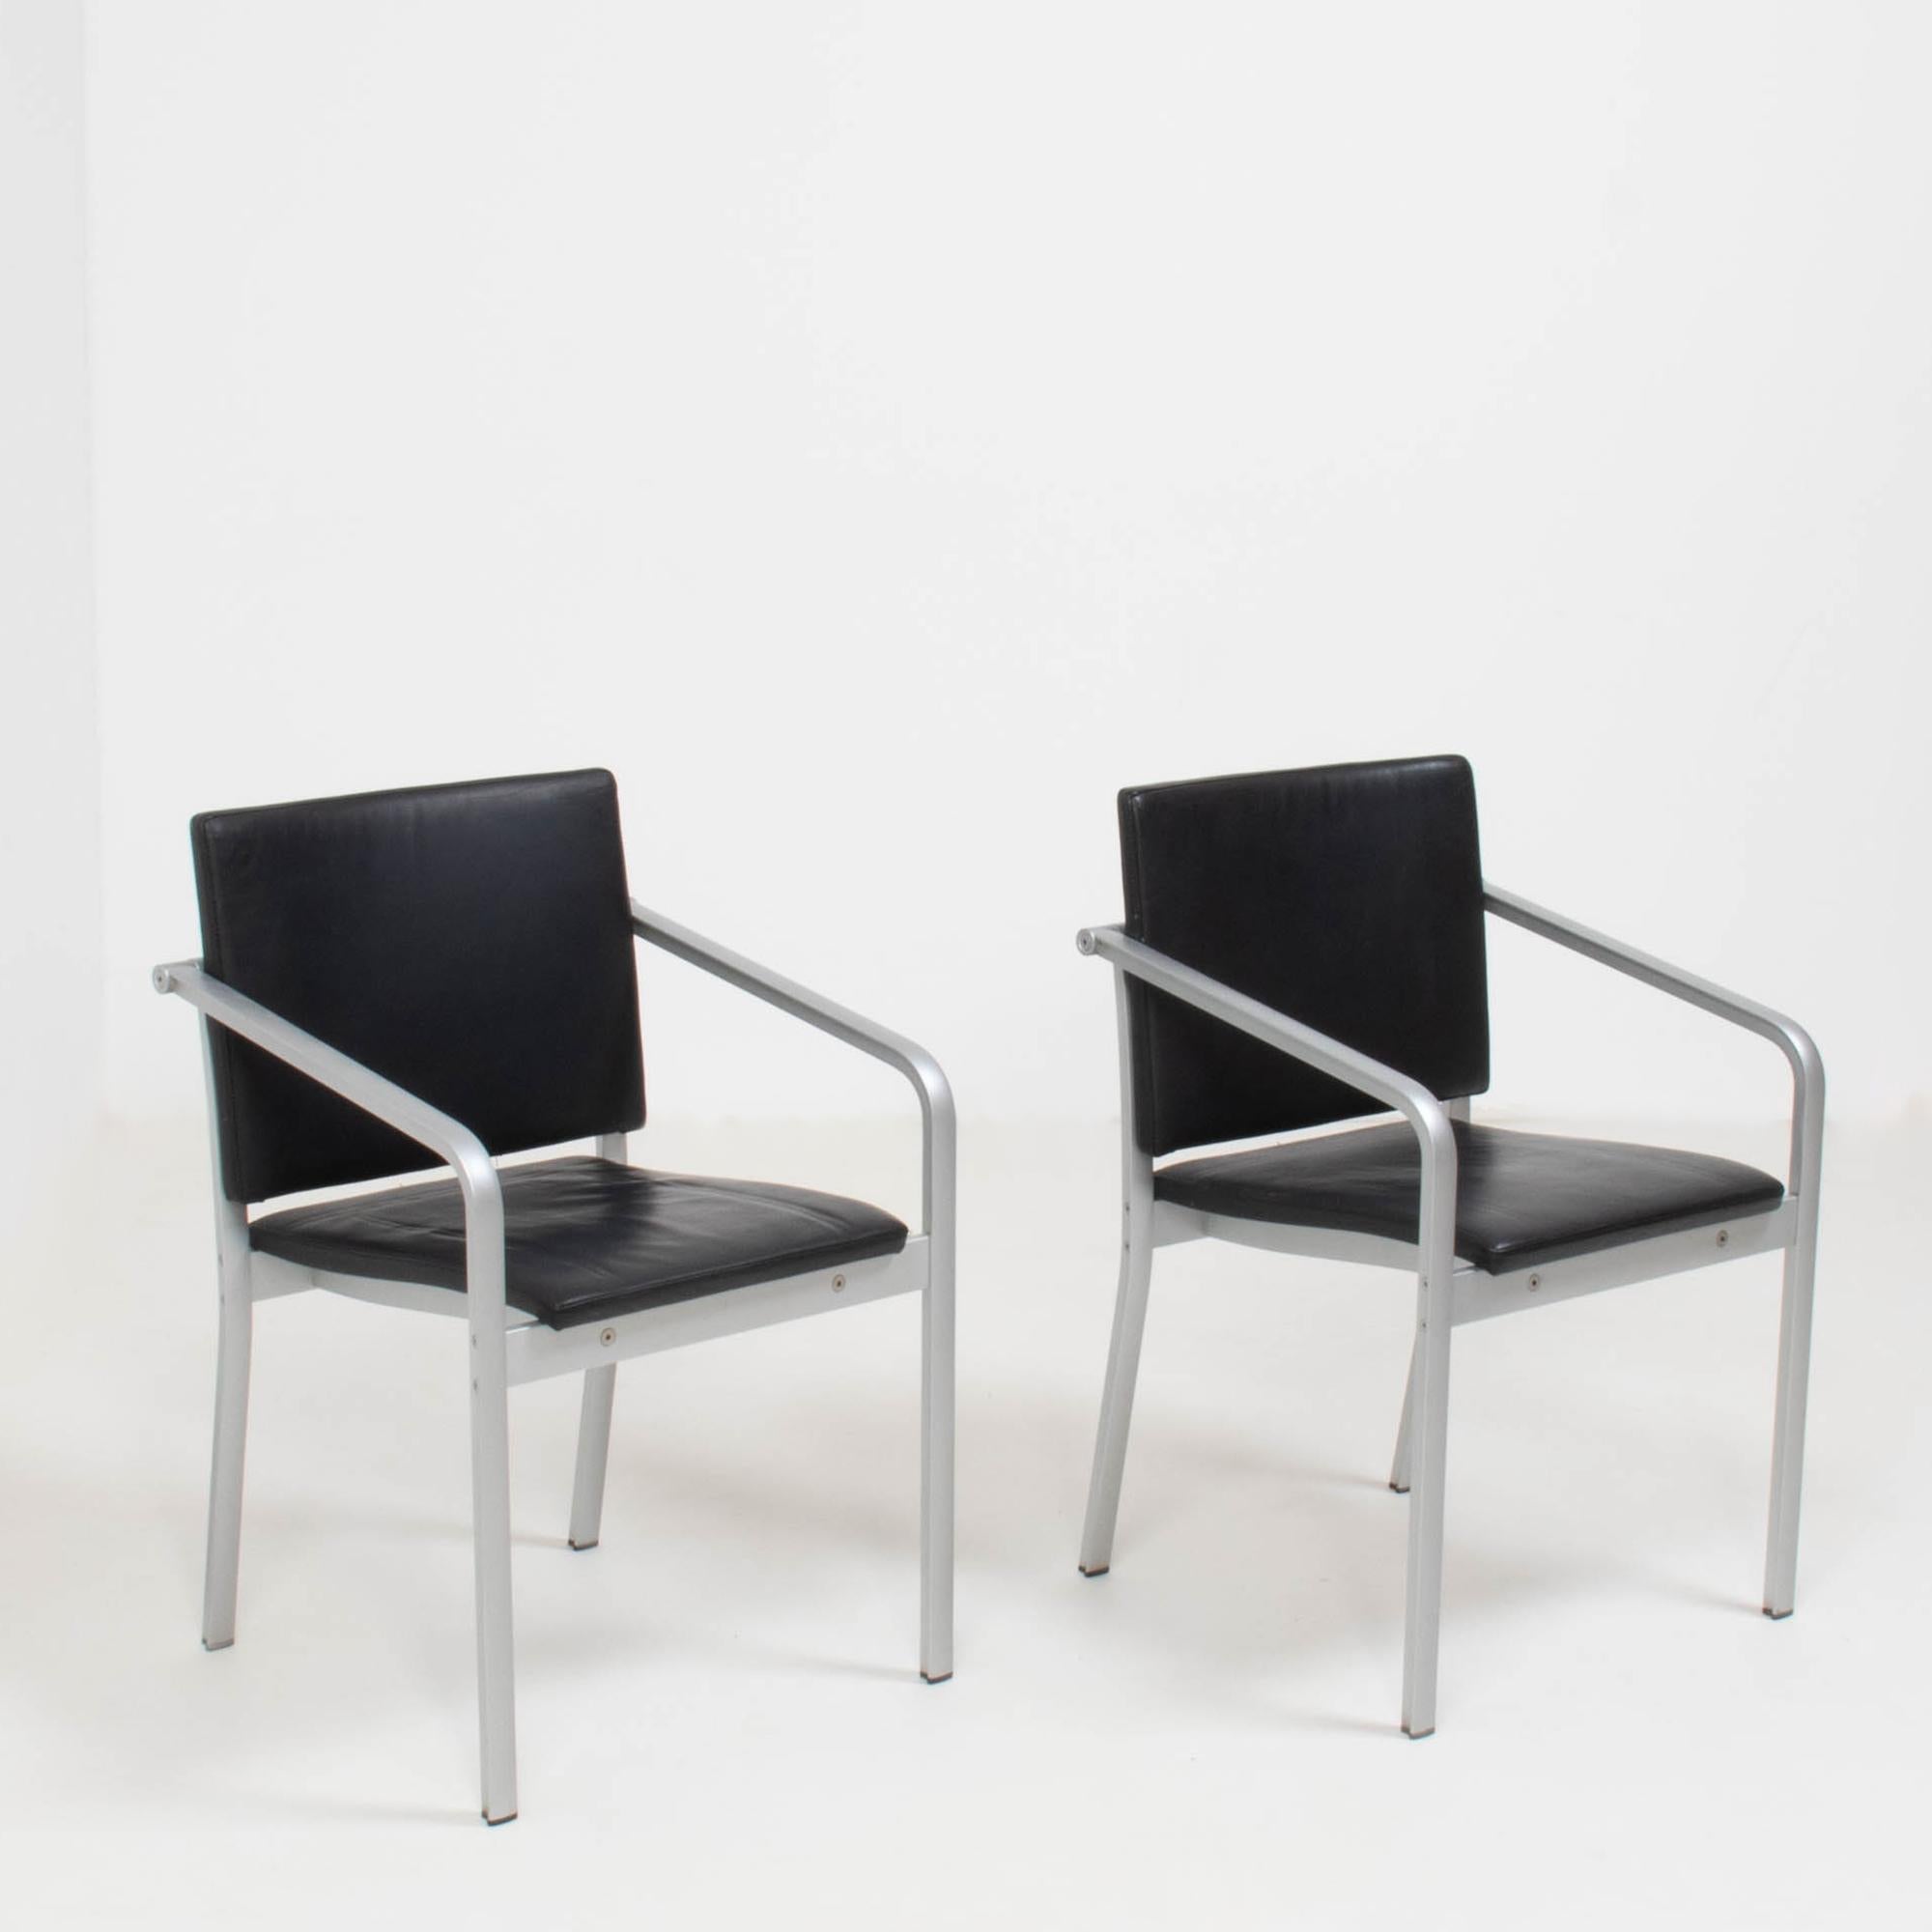 Designed by Sir Norman Foster for Thonet, these A901 PF chairs are a fantastic example of modern design.

Inspired by the Bauhaus movement, the chairs are constructed from bent aluminum frames with the fixings becoming a feature of the